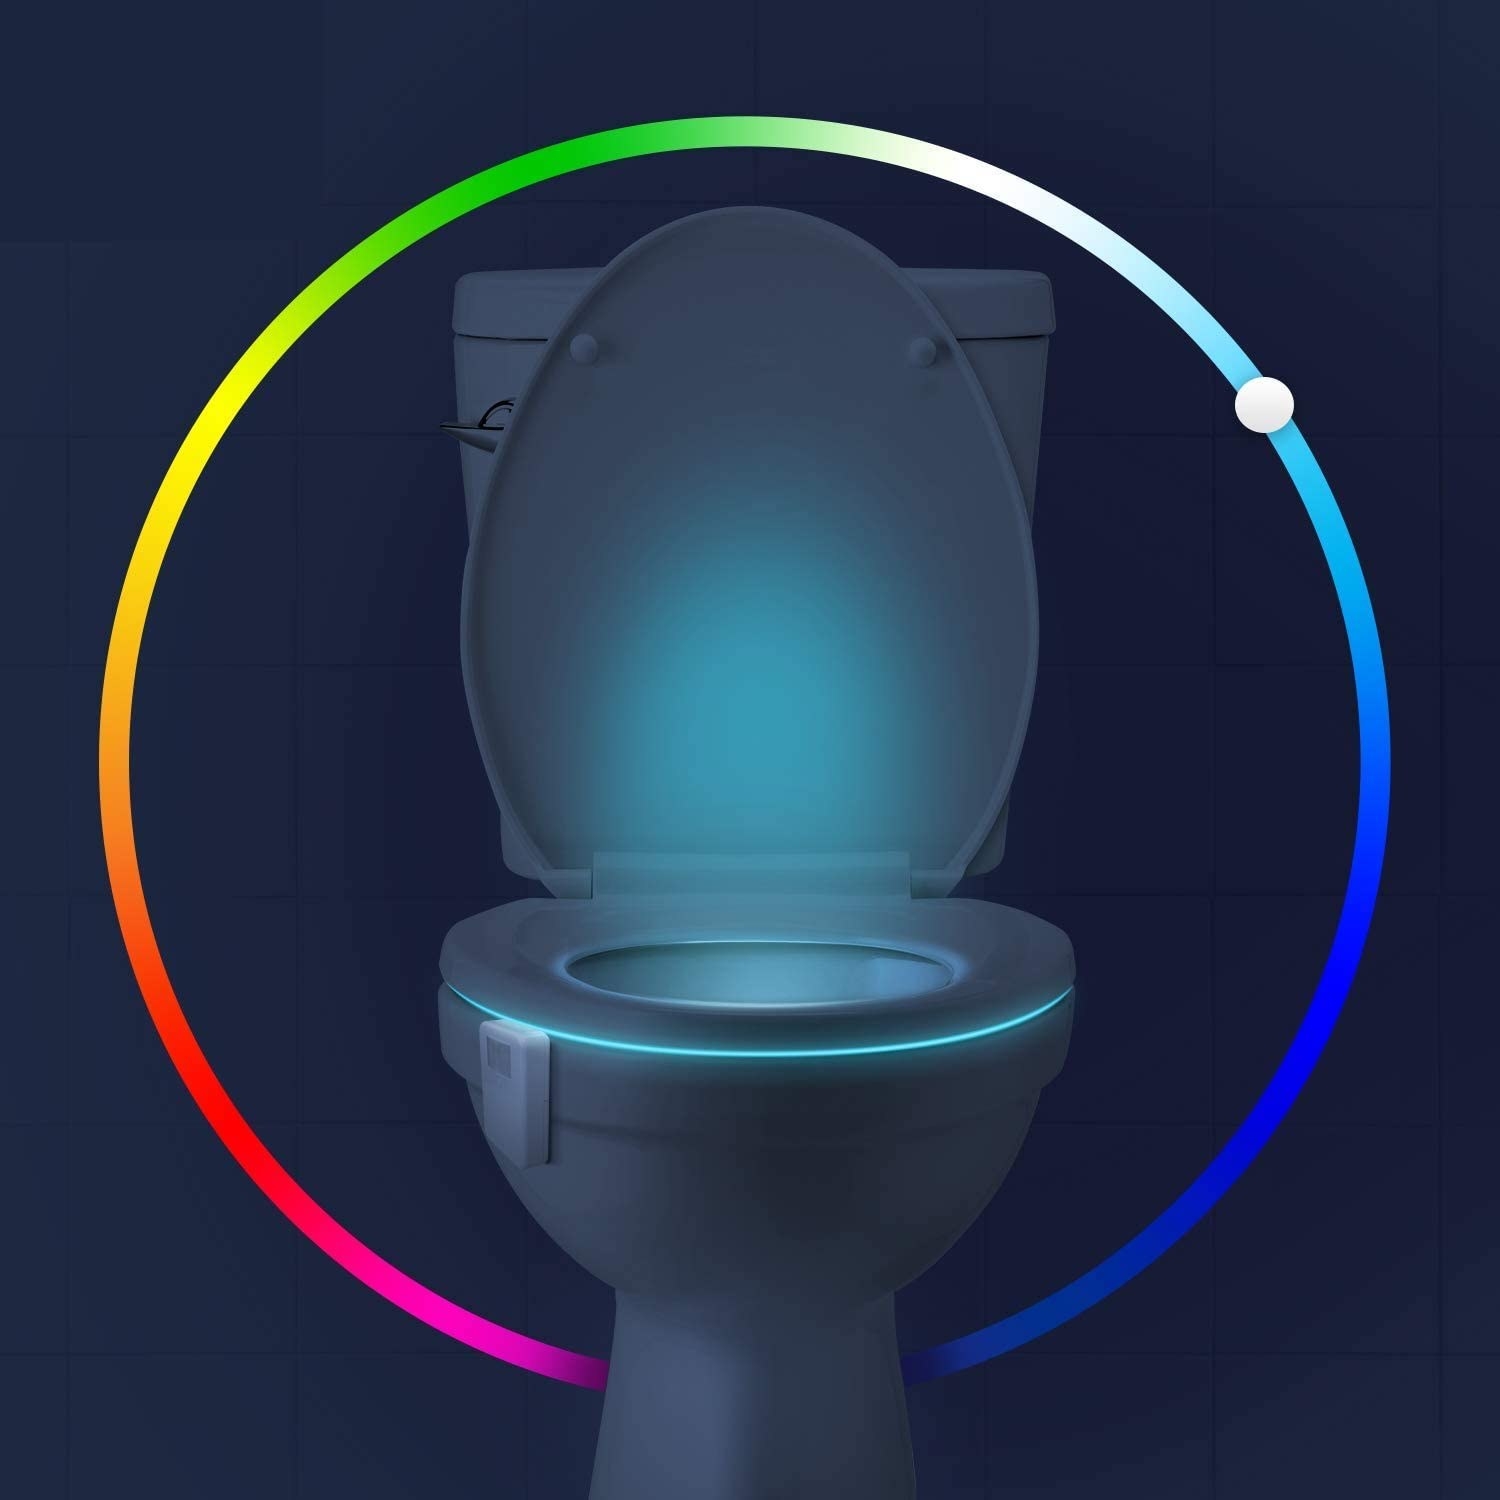 A toilet bowl lit up from within